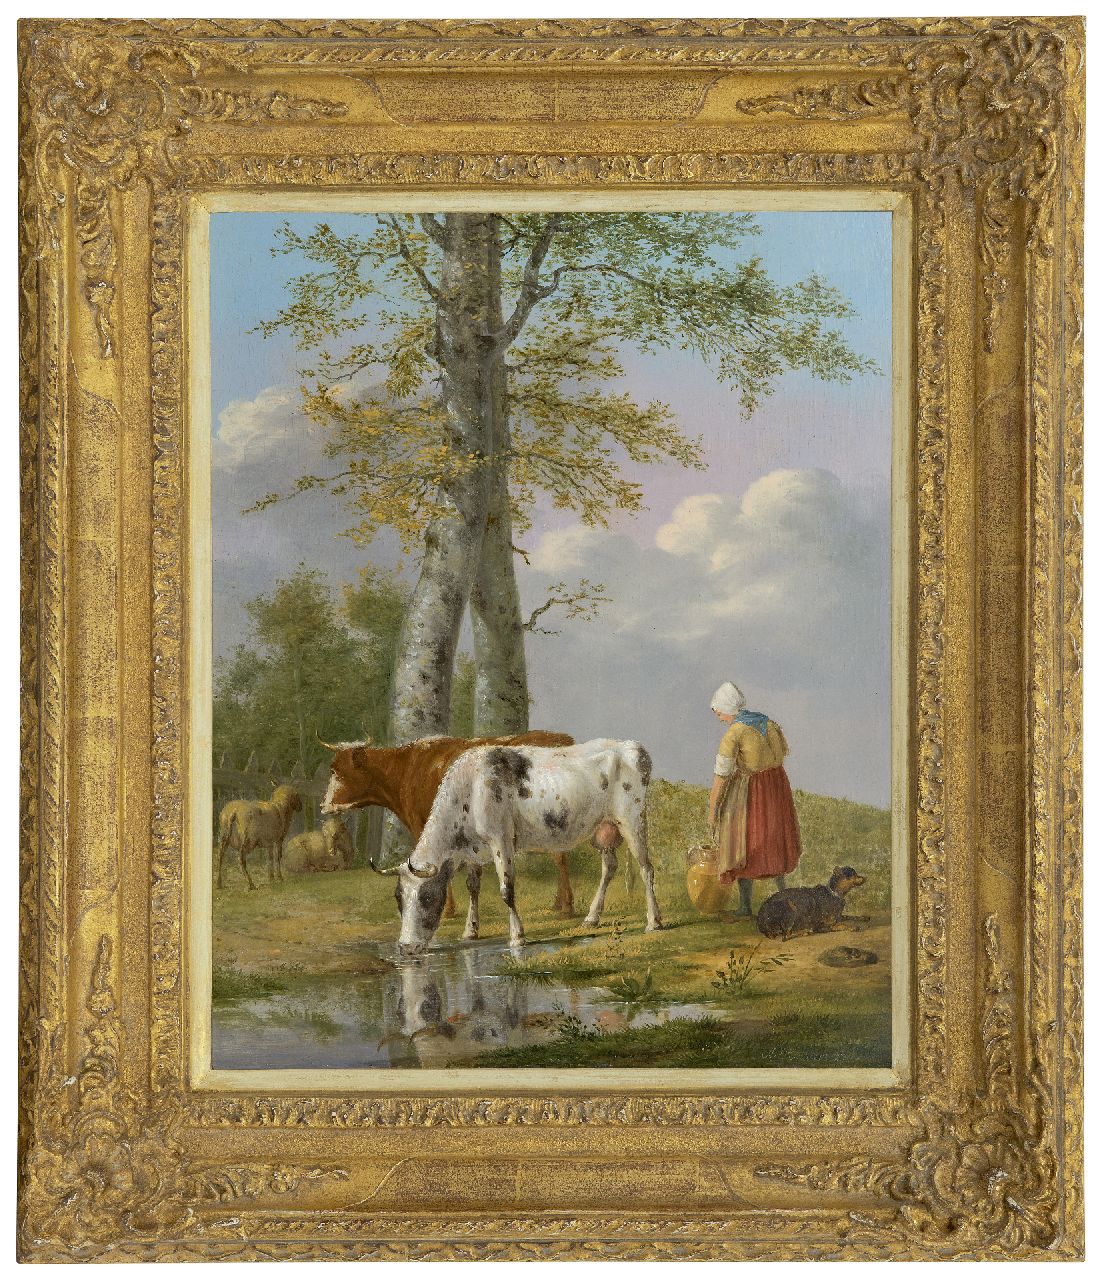 Oberman A.  | Anthony Oberman | Paintings offered for sale | Milking time, oil on panel 37.5 x 30.3 cm, signed l.r.